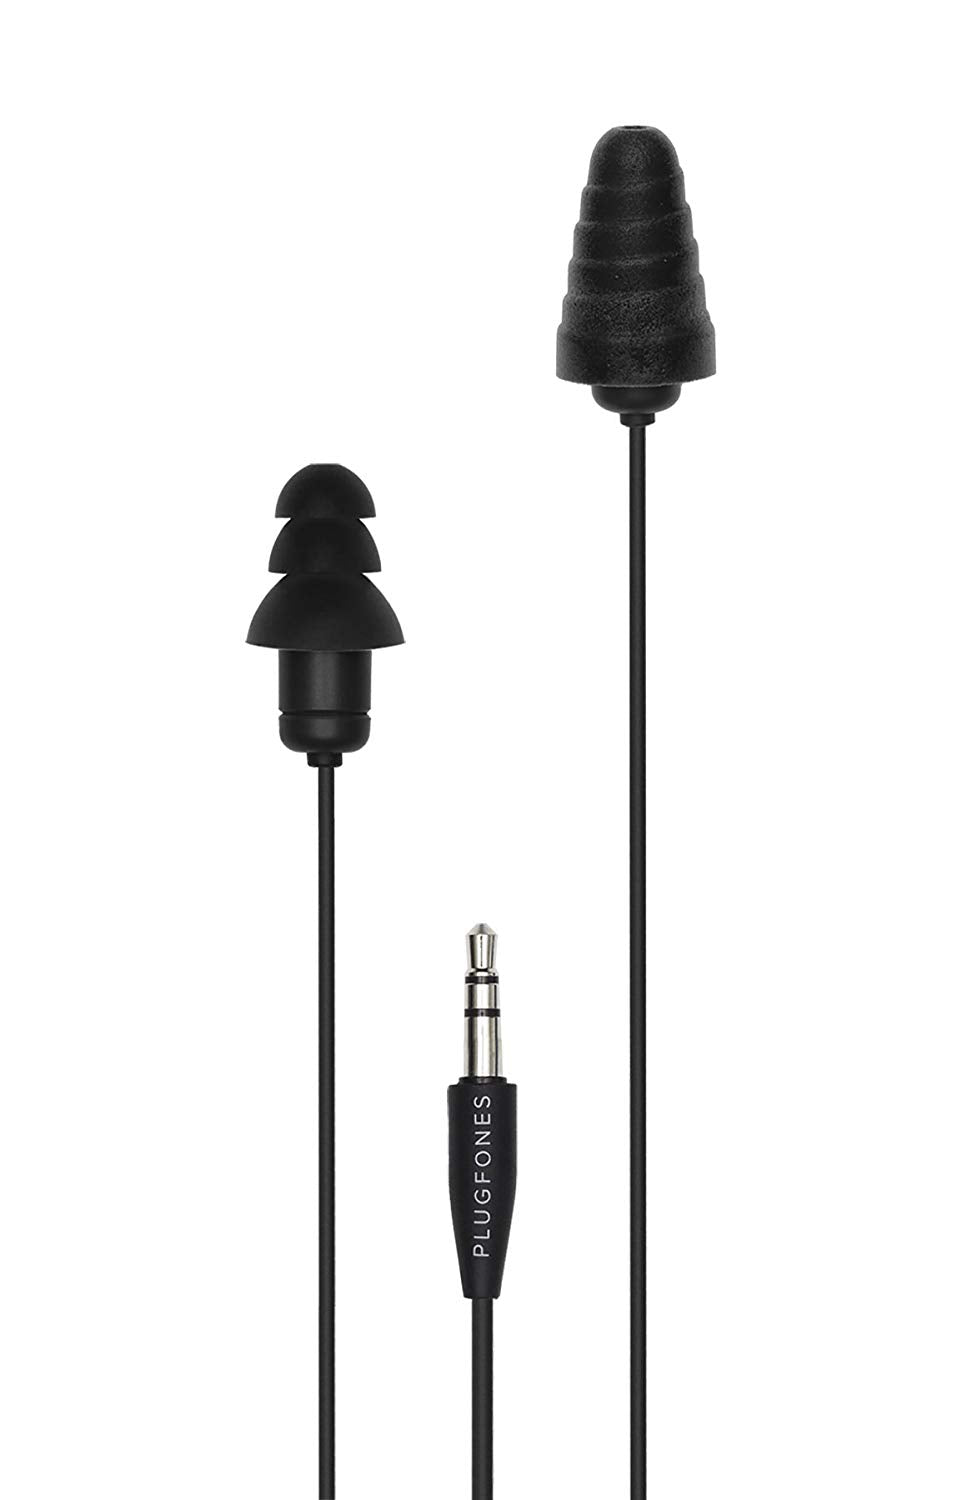 Plugfones PG-BB Guardian Wired Earphone with Foam & Silicon Tips, Black, 54"